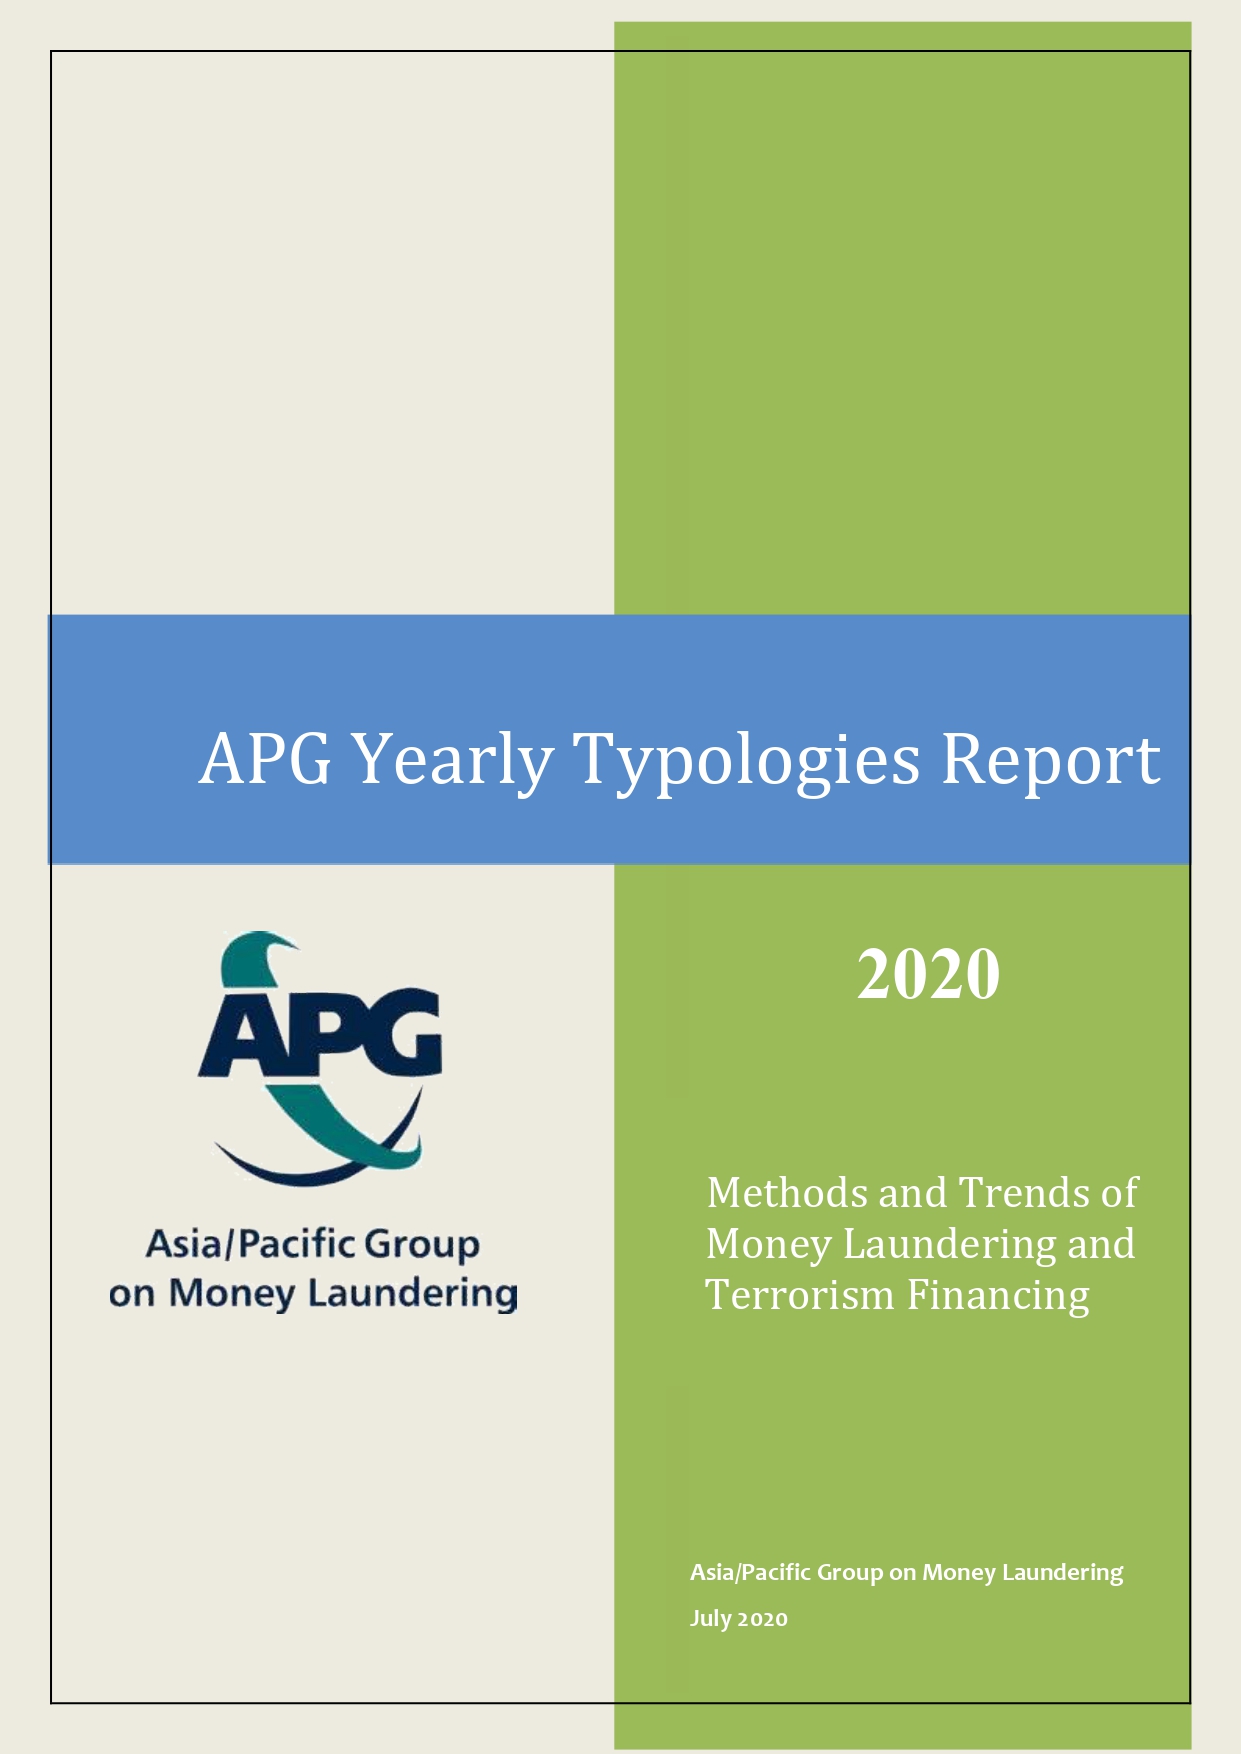 APG Yearly Typologies Report 2020-1_page-0001.jpg